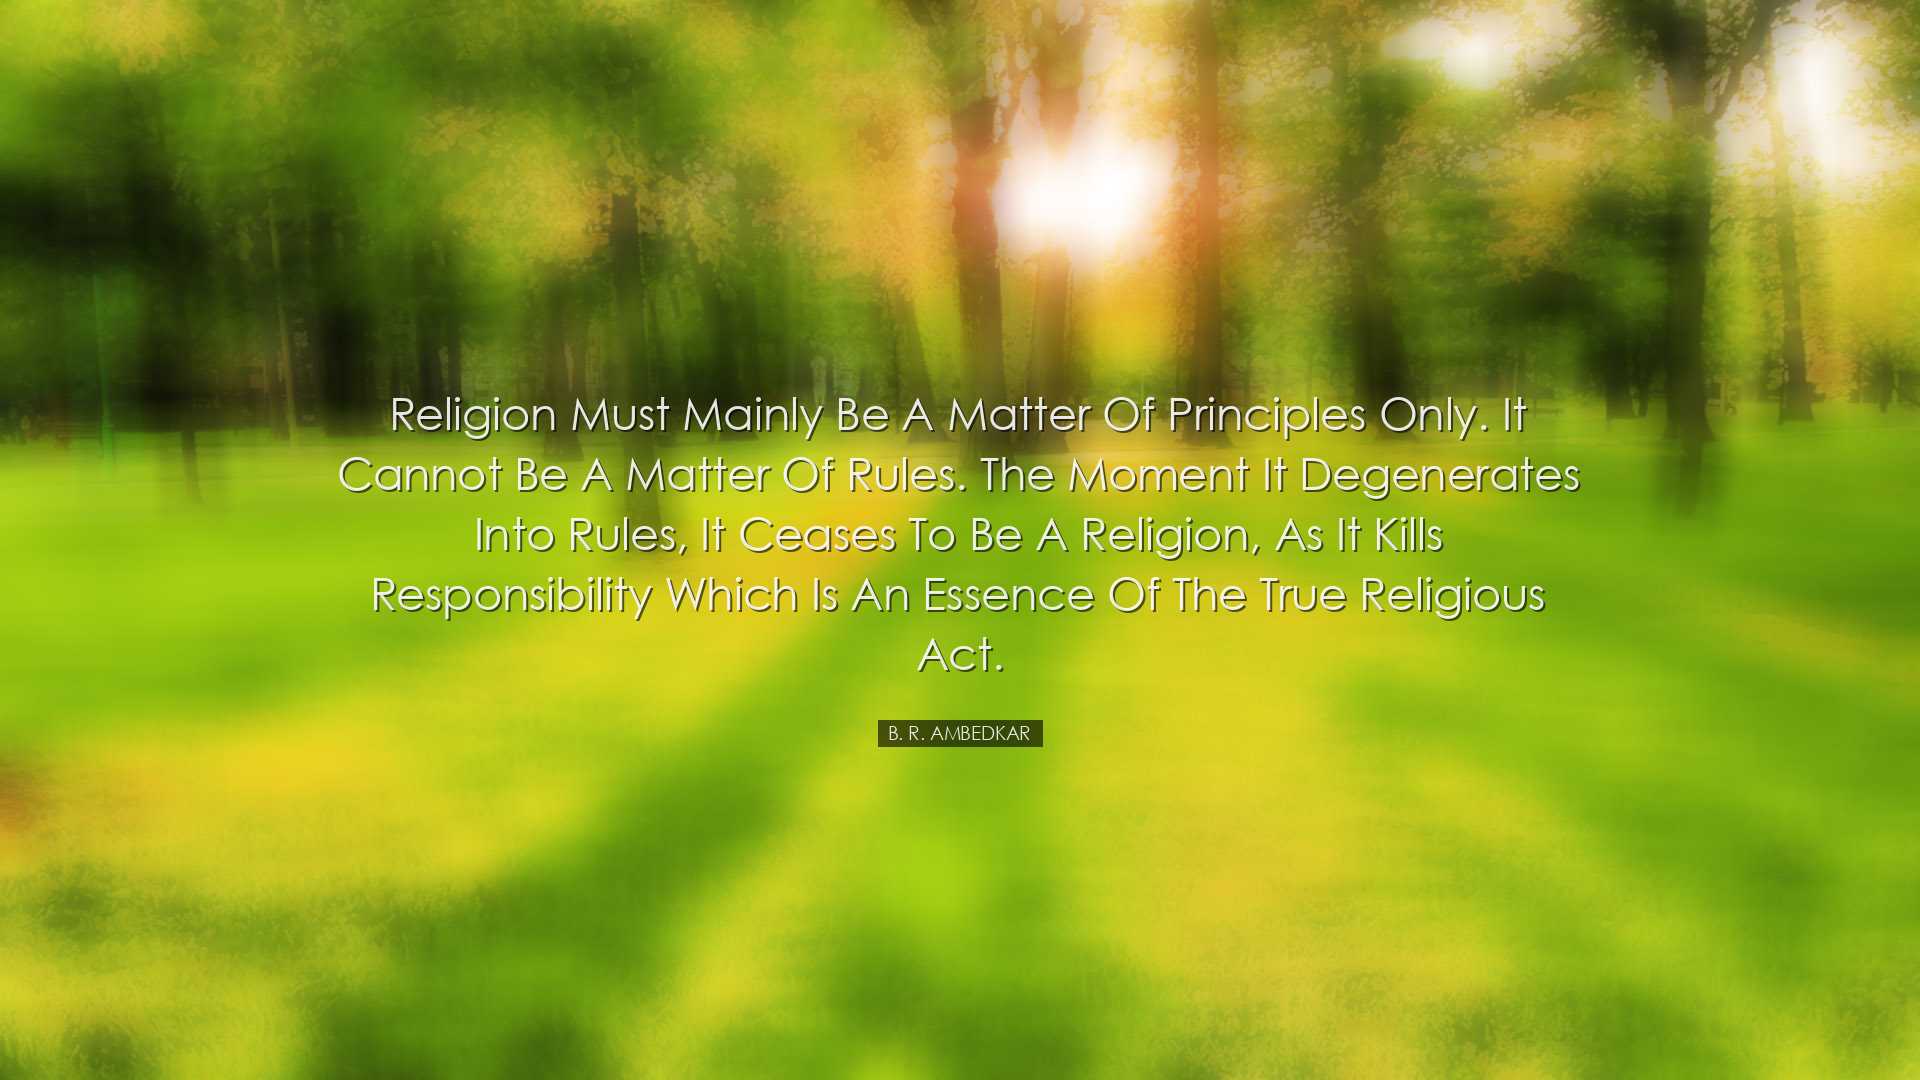 Religion must mainly be a matter of principles only. It cannot be